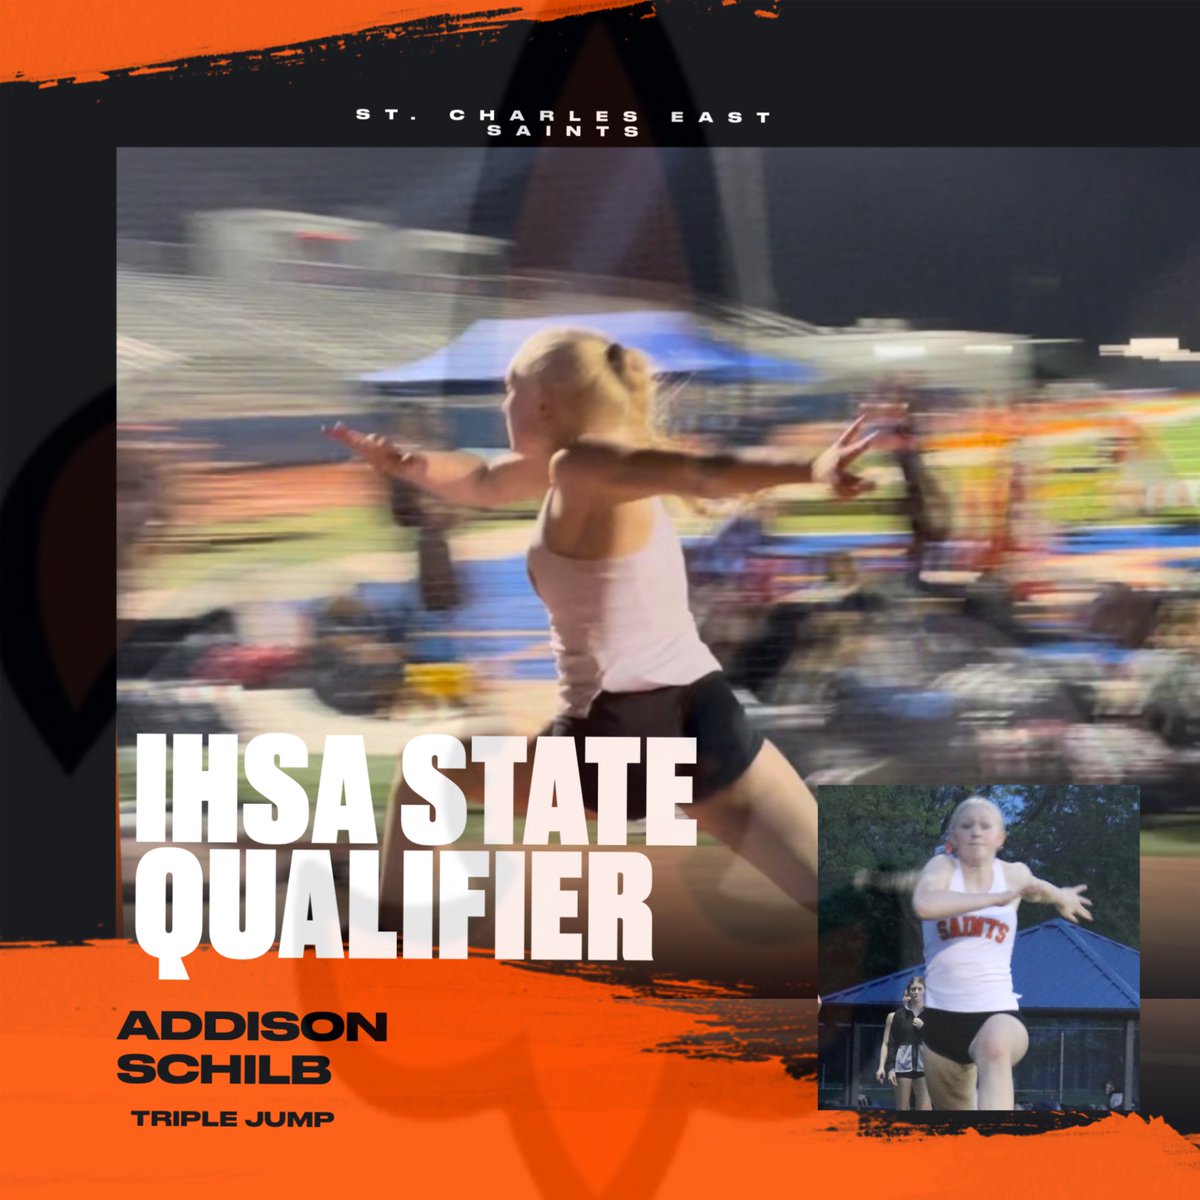 Addison Schilb is our first Triple Jumper at state since Katie Kempff in 2022! She keeps getting better and better! Can’t wait for her to experience competing at the State Meet in Triple and the 4x200!